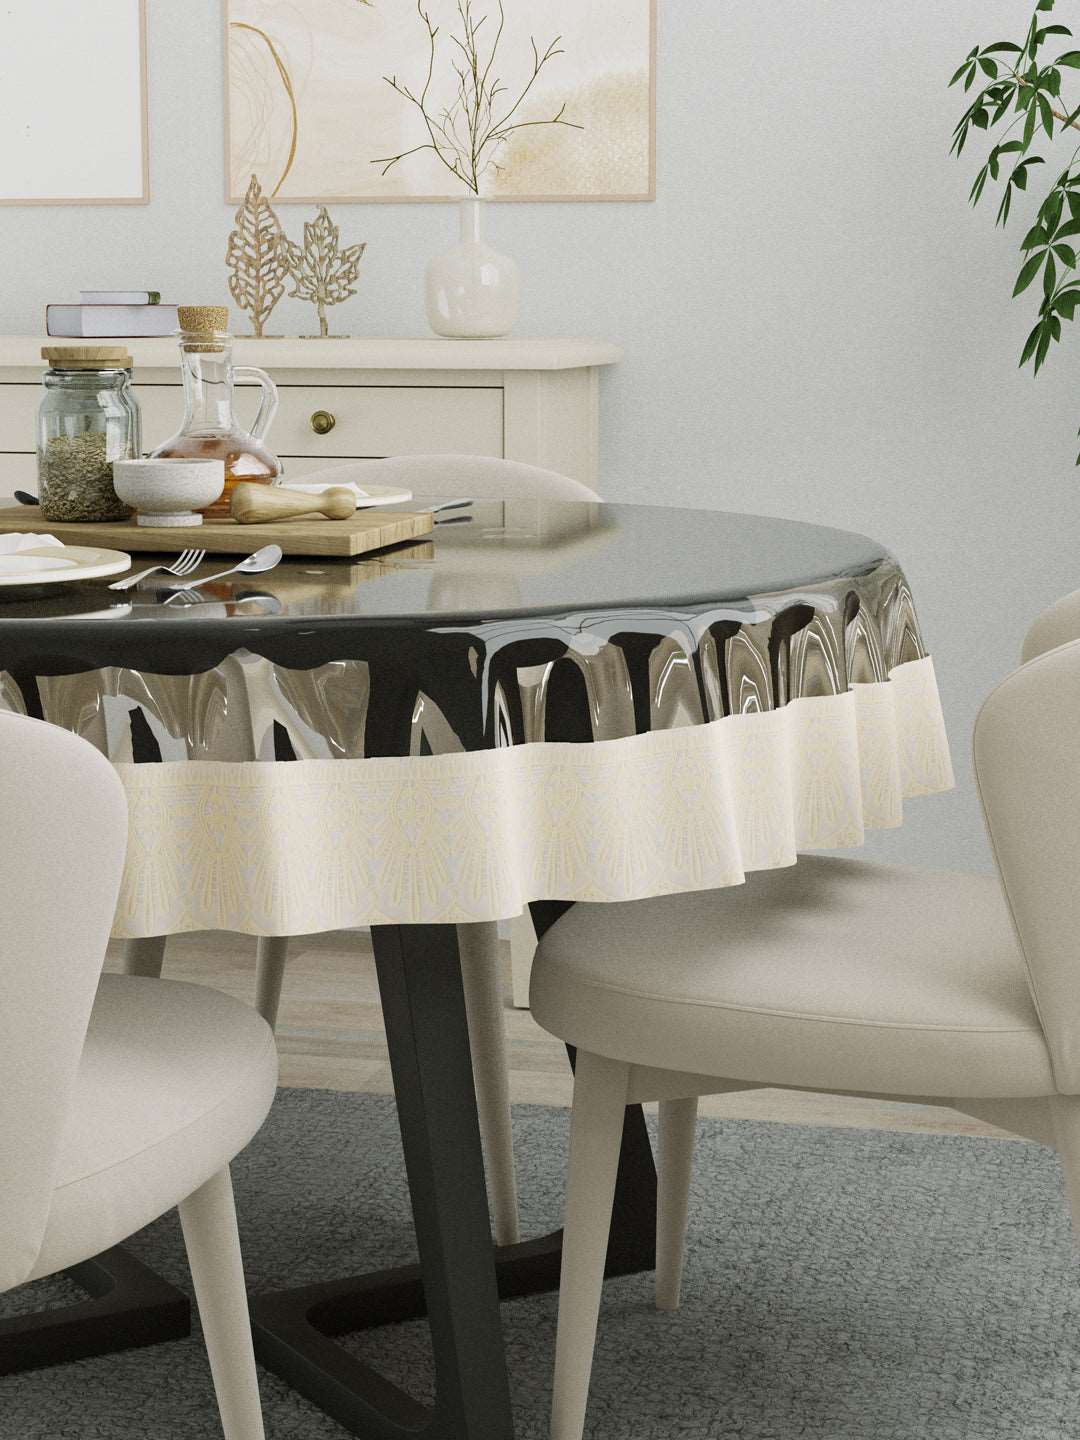 4 Seater Dining Table Cover; 60x60 Inches; Material - PVC; Anti Slip; Cream Lace